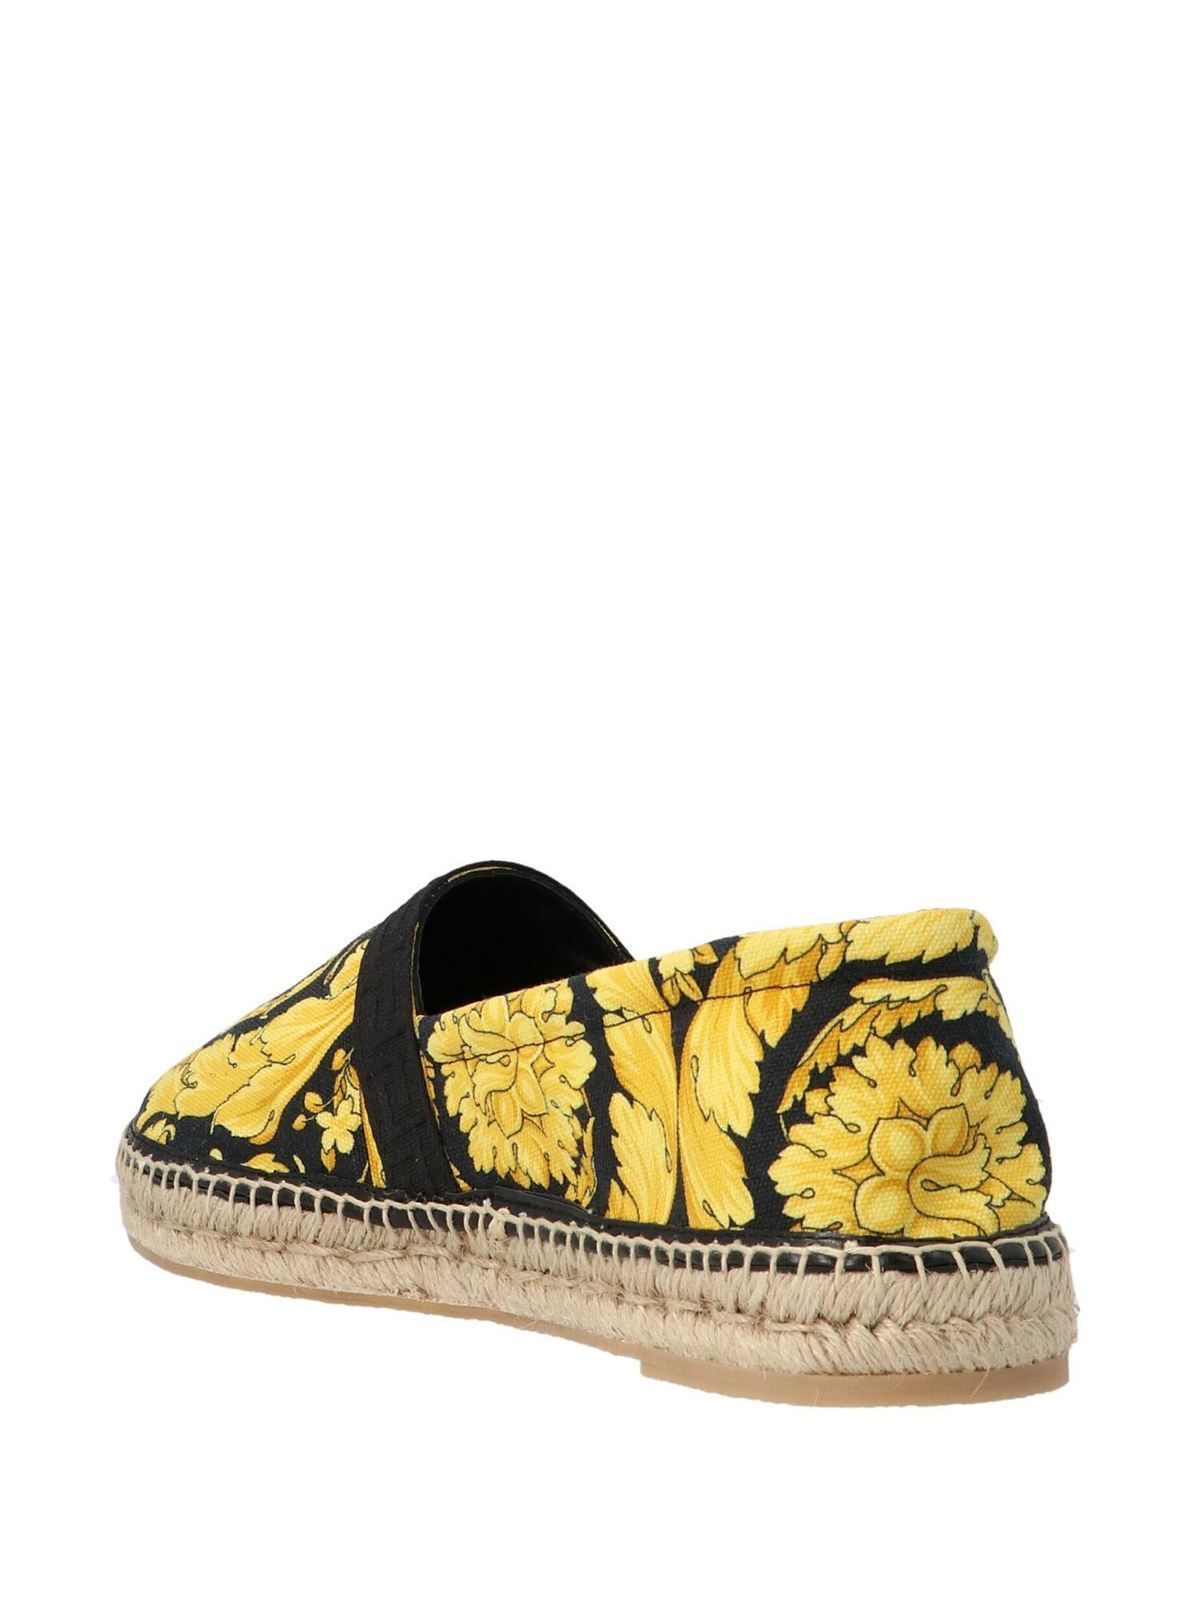 Versace - Barocco espadrilles in black and gold color - espadrilles ...